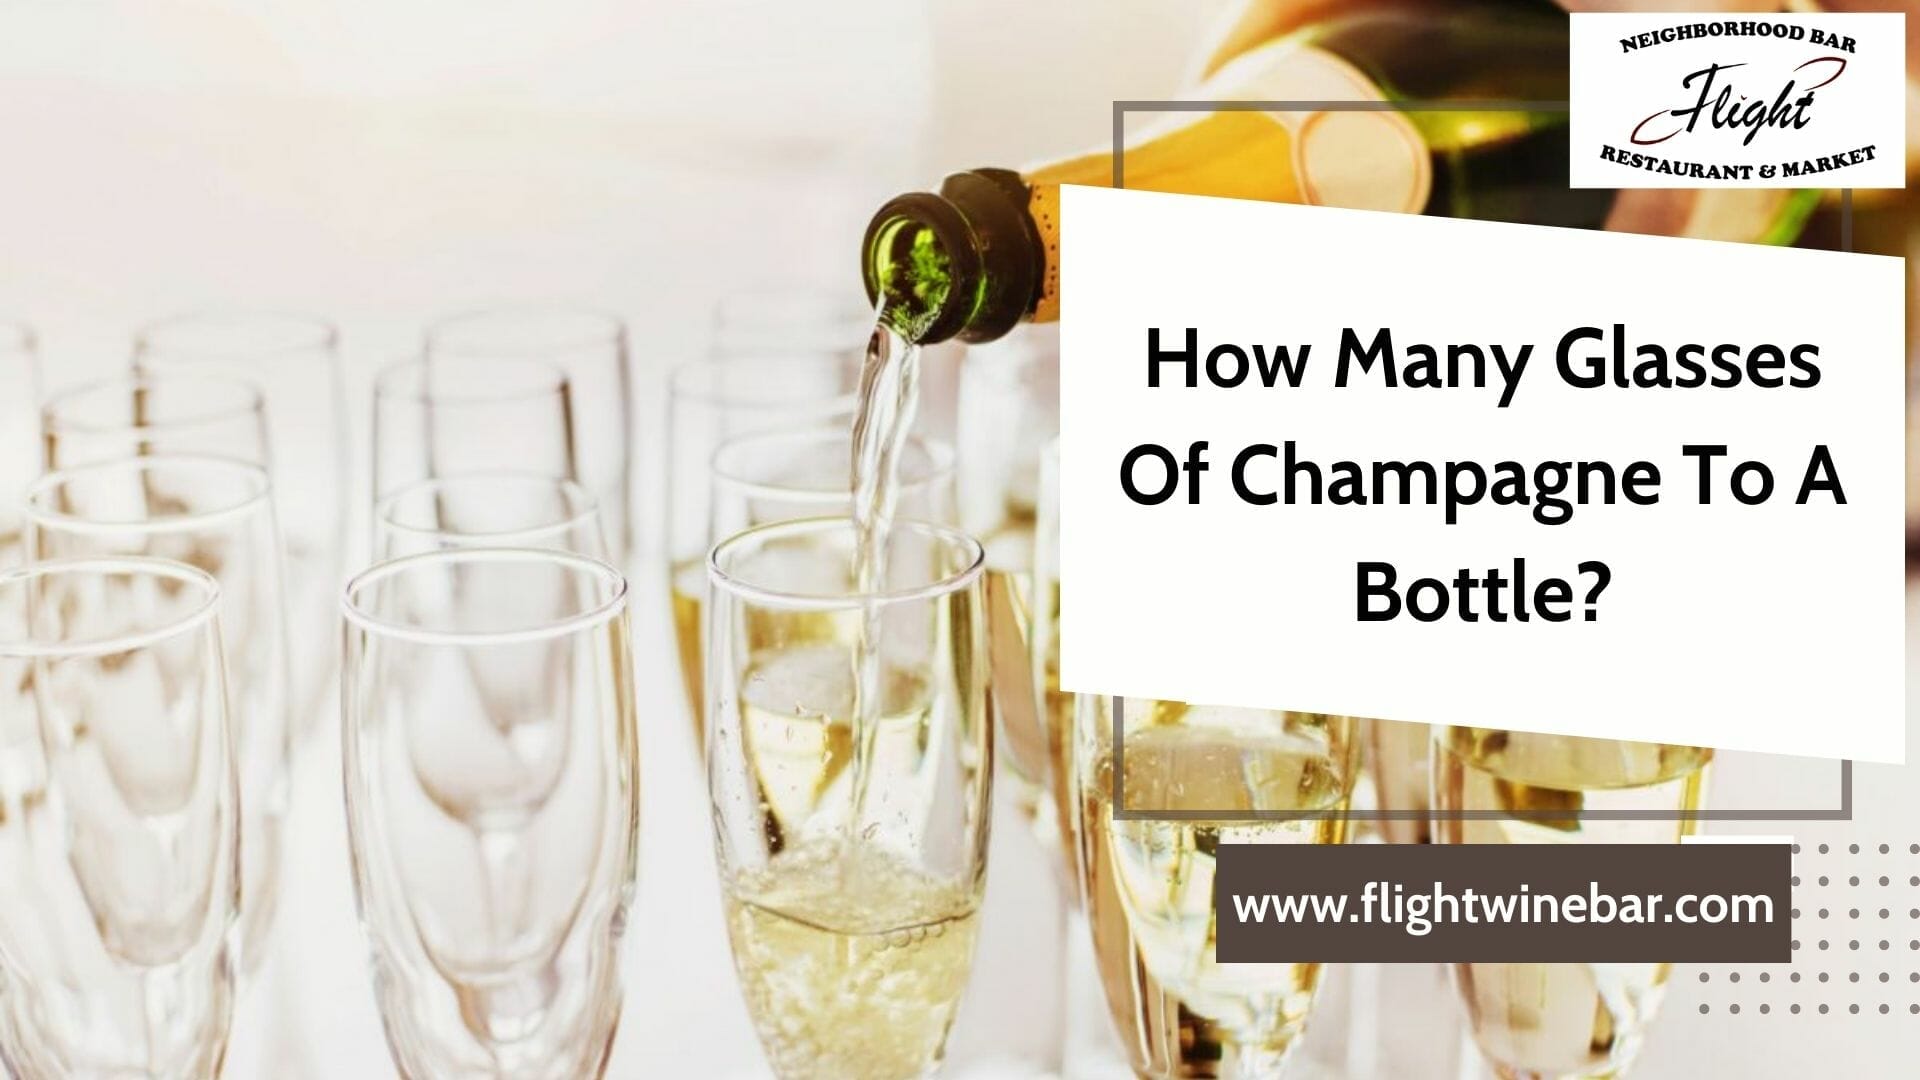 How Many Glasses Of Champagne To A Bottle